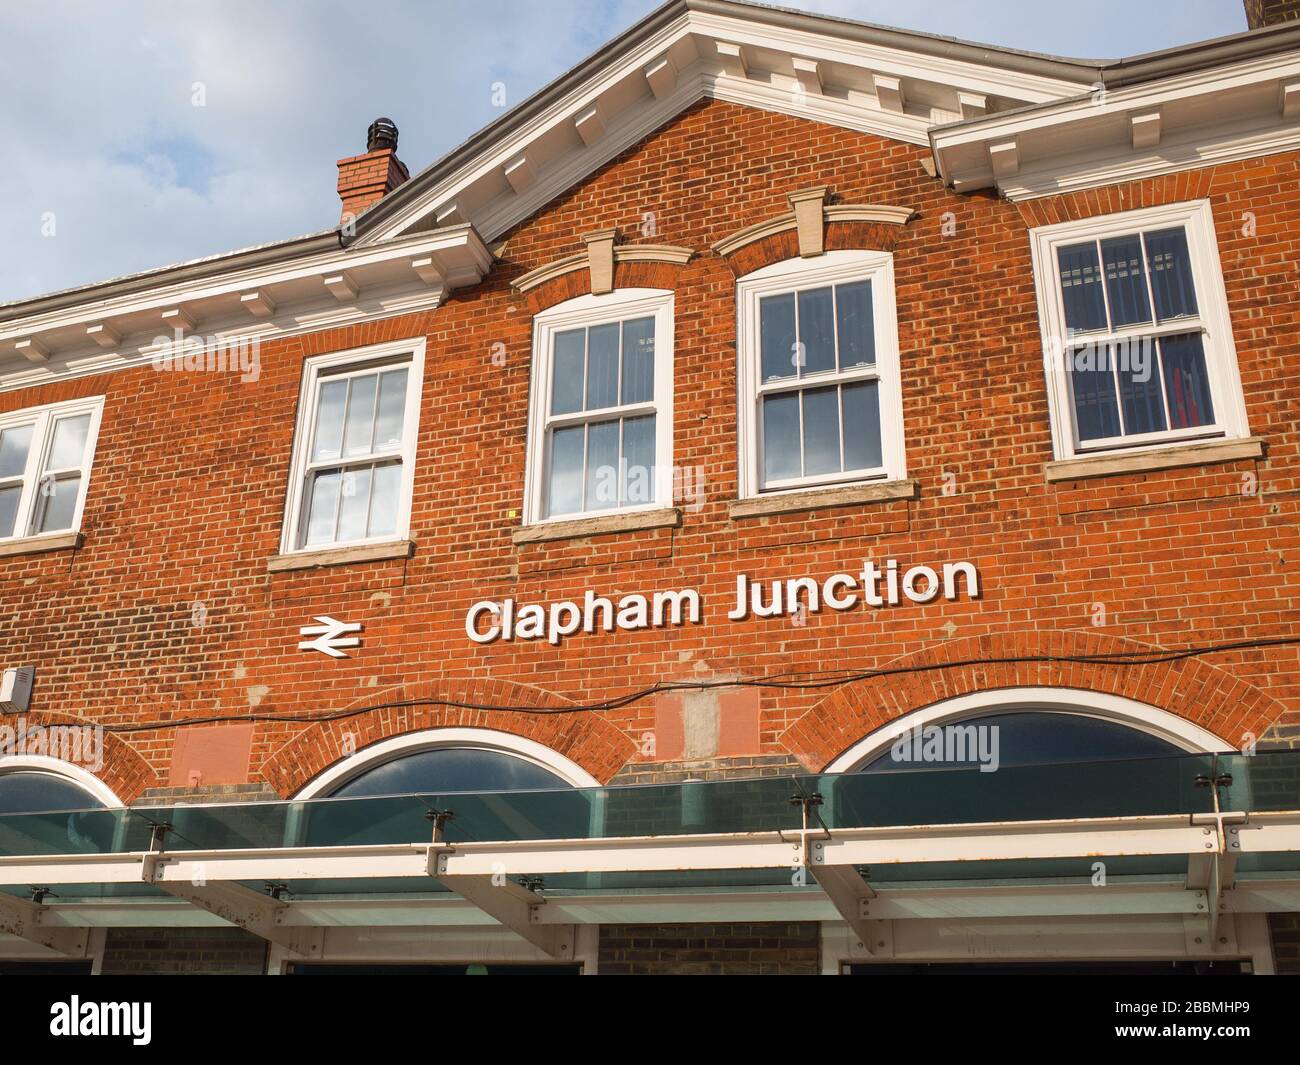 Clapham Junction railway station, a maor transort hub in Battersea, south west London- UK Stock Photo